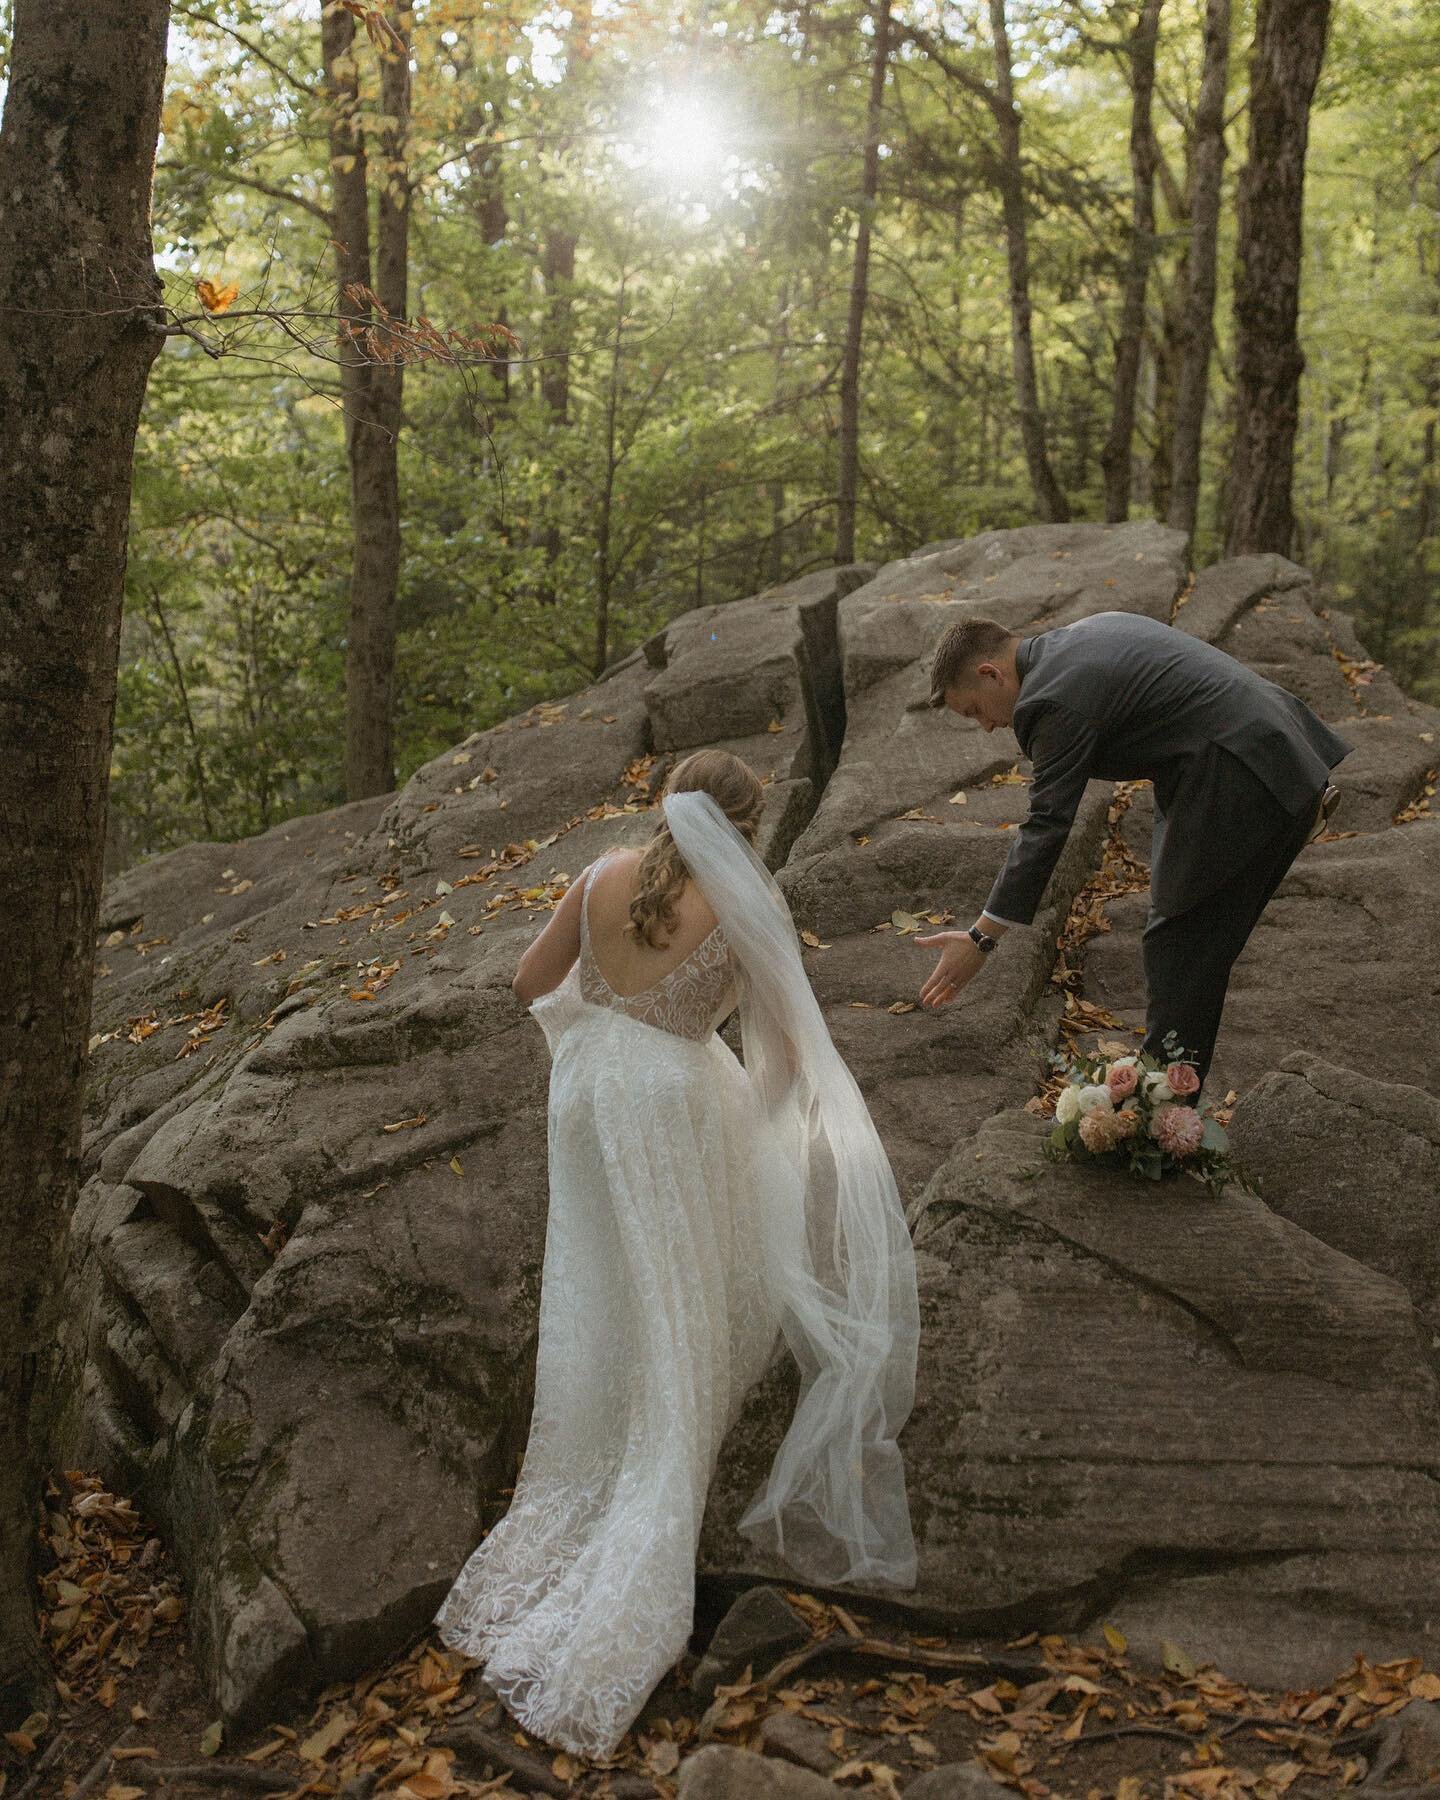 Julia and Brett got married at a brewery but wanted to take some time for just the two of them after the ceremony. We ventured to @arrowheadprovpark as Fall was settling into the landscape, waterfalls were rushing, and the air was earthy. It was impo